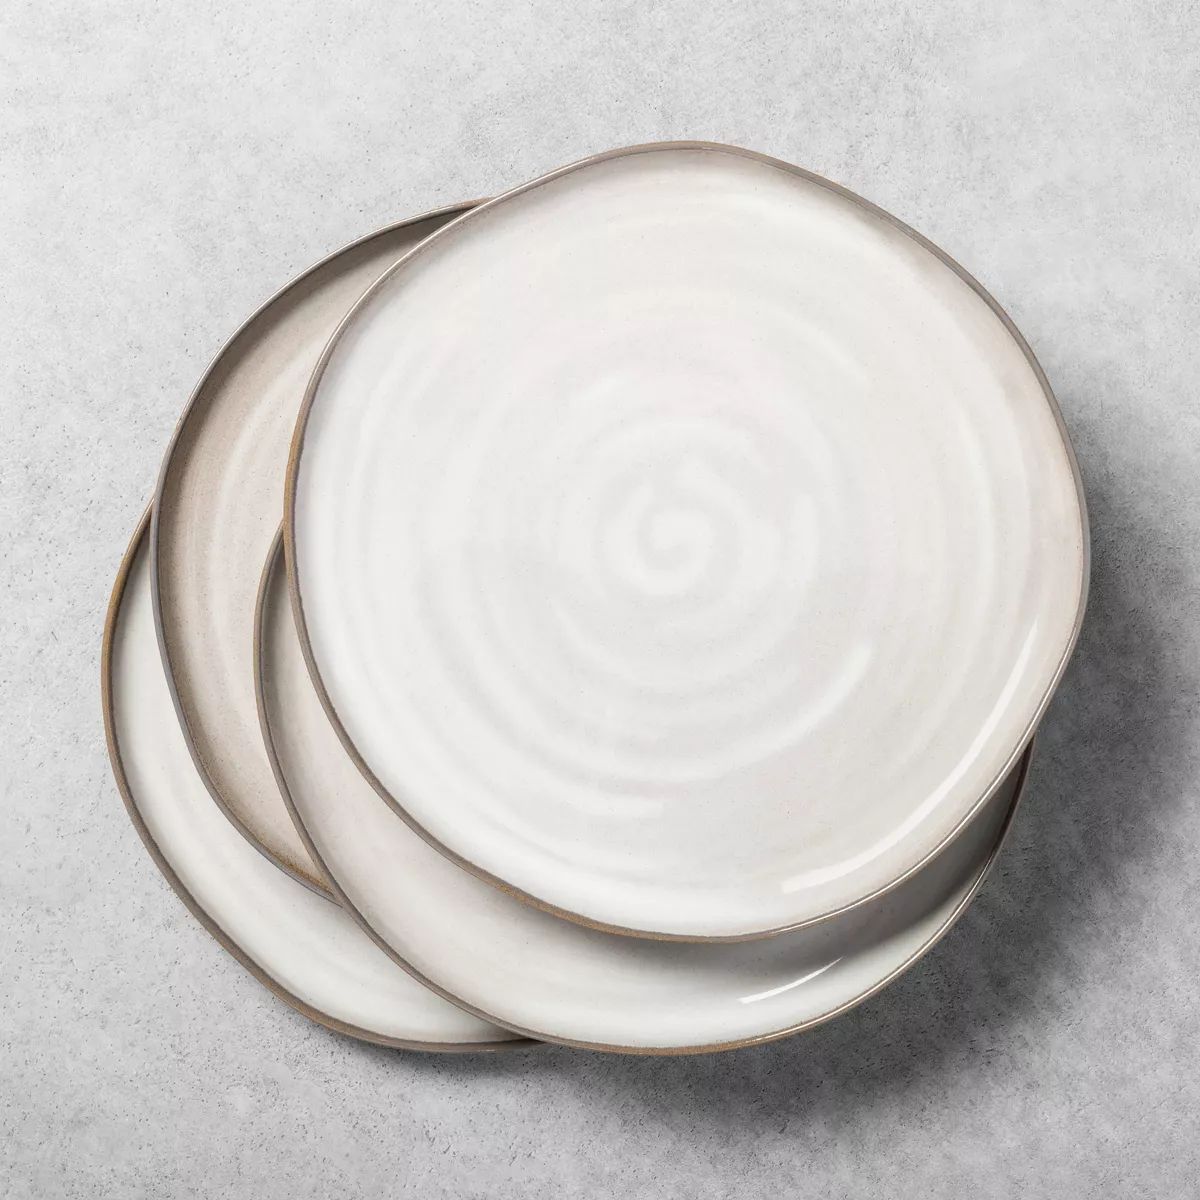 10.5" Stoneware Reactive Glaze Dinner Plate - Hearth & Hand™ with Magnolia | Target